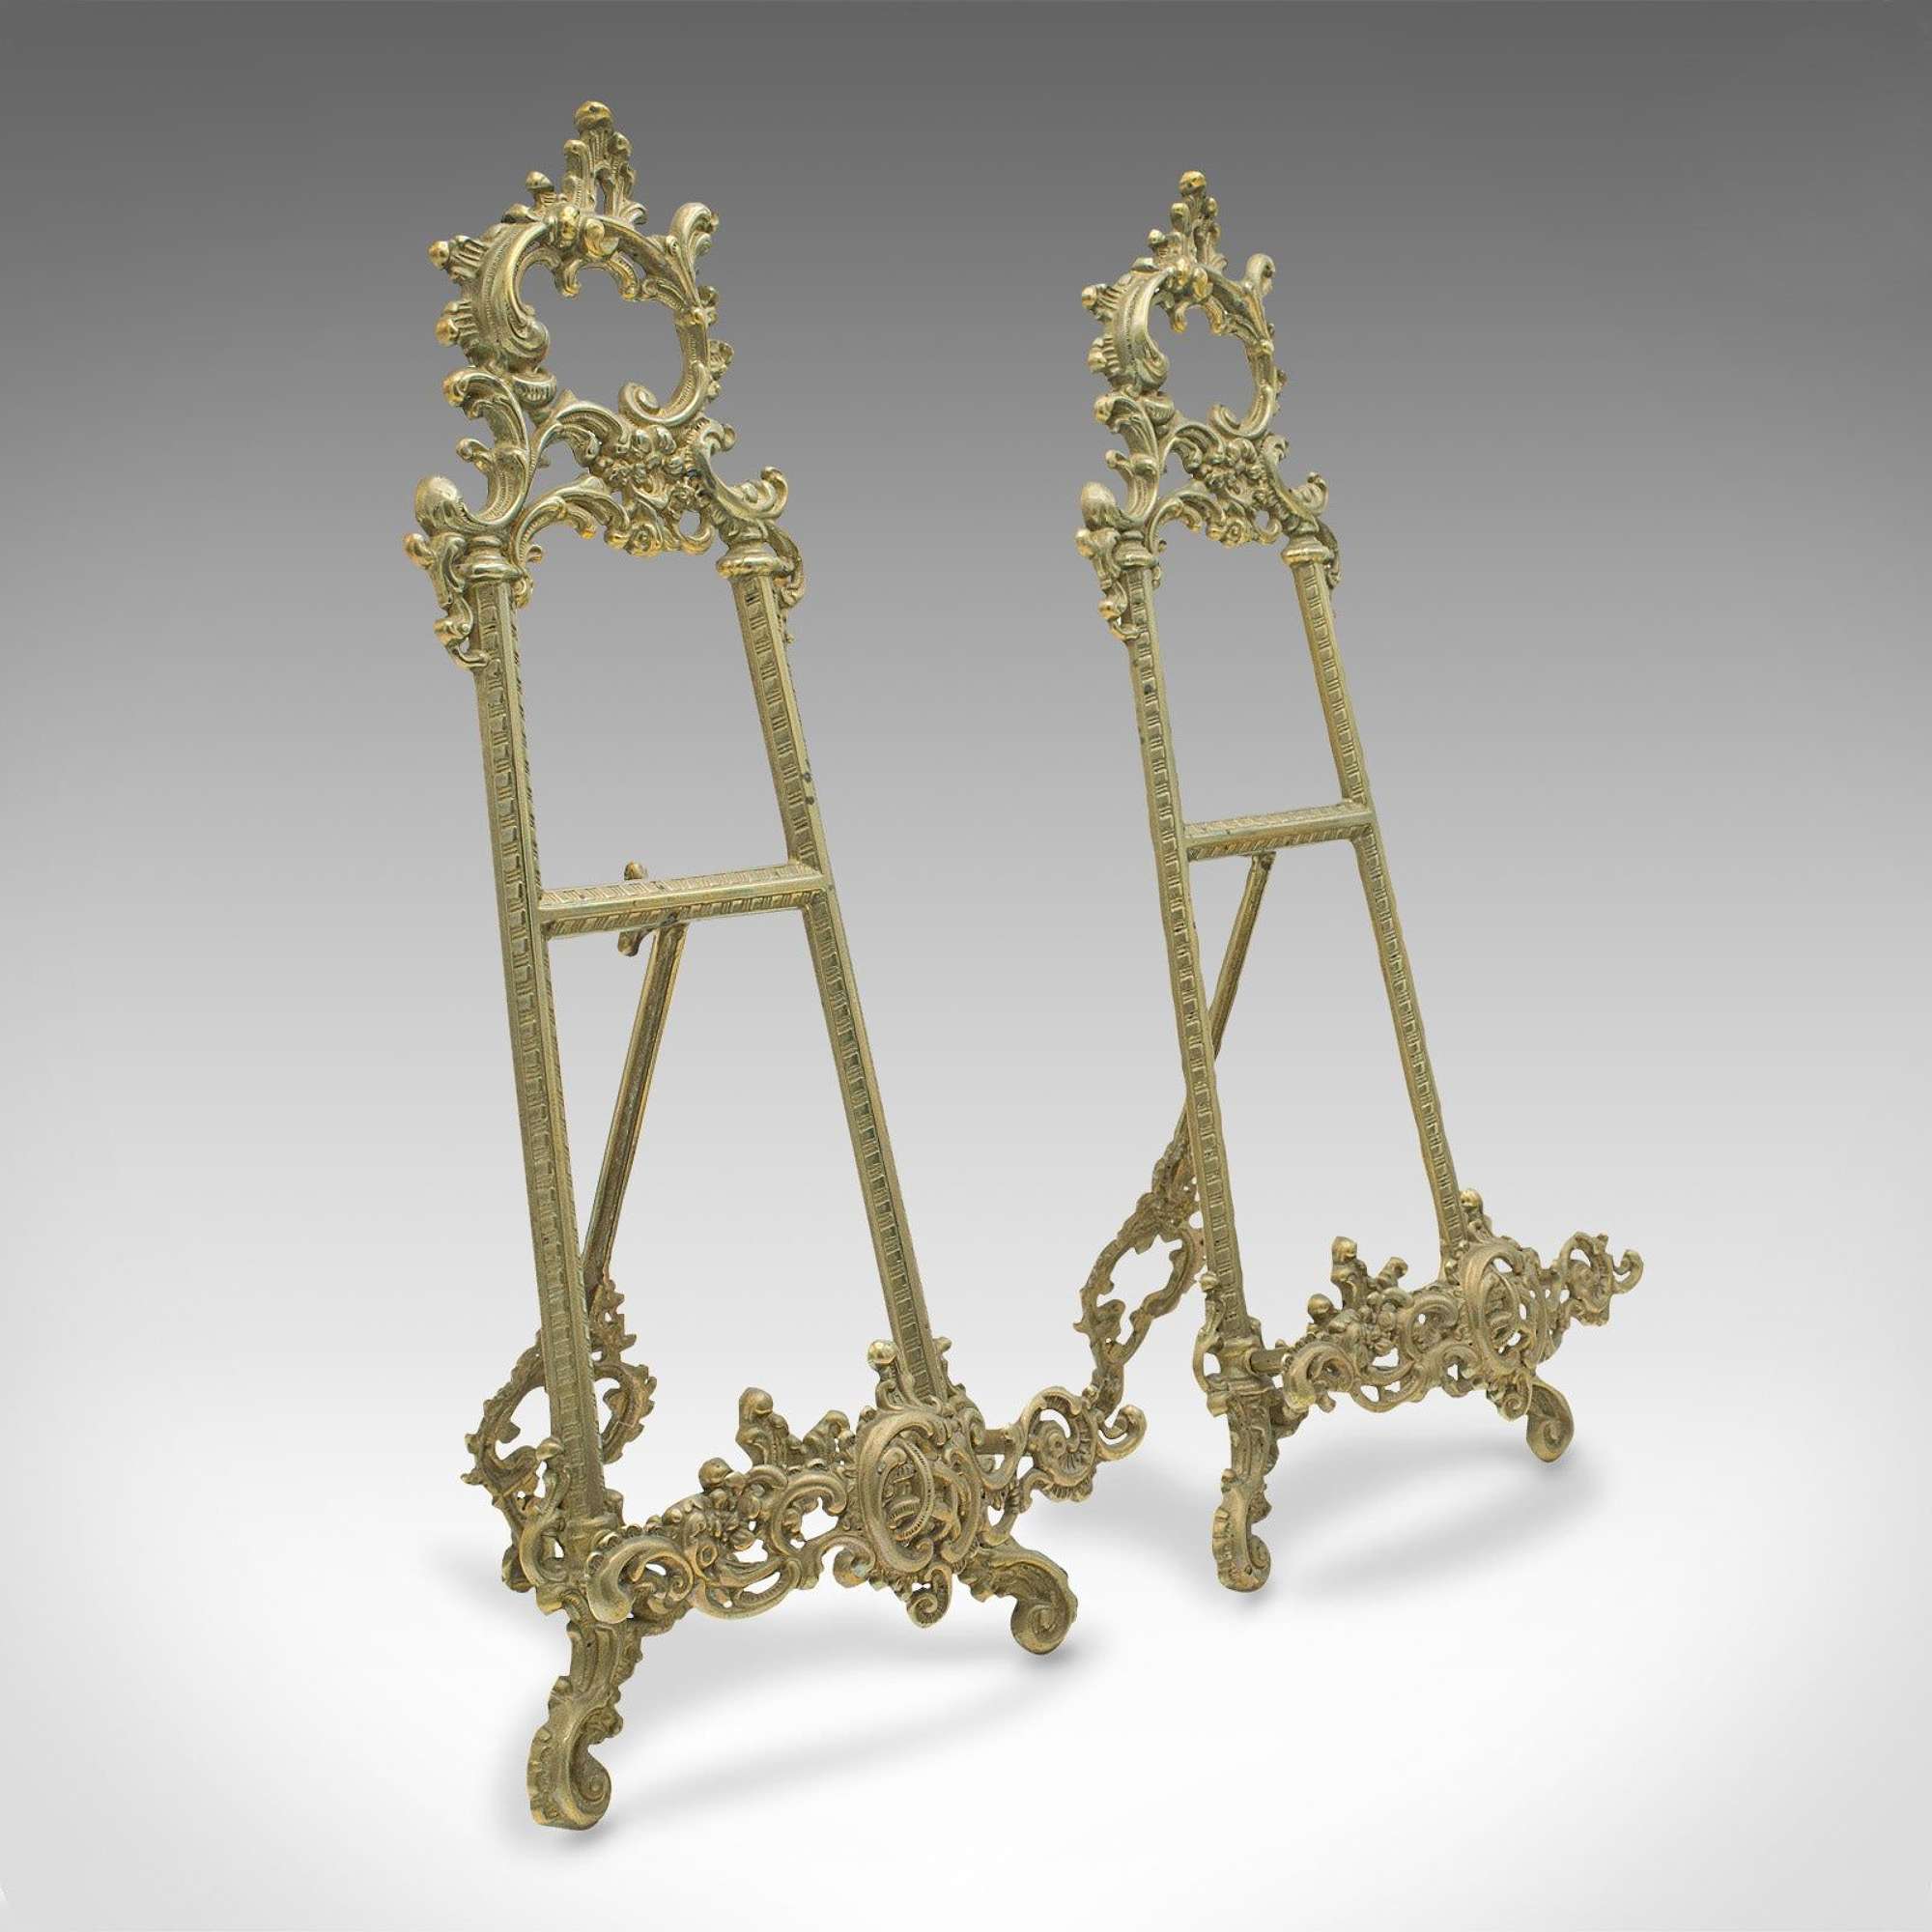 Pair Of Antique Decorative Picture Stands, English, Brass, Book Rest, Art Easel